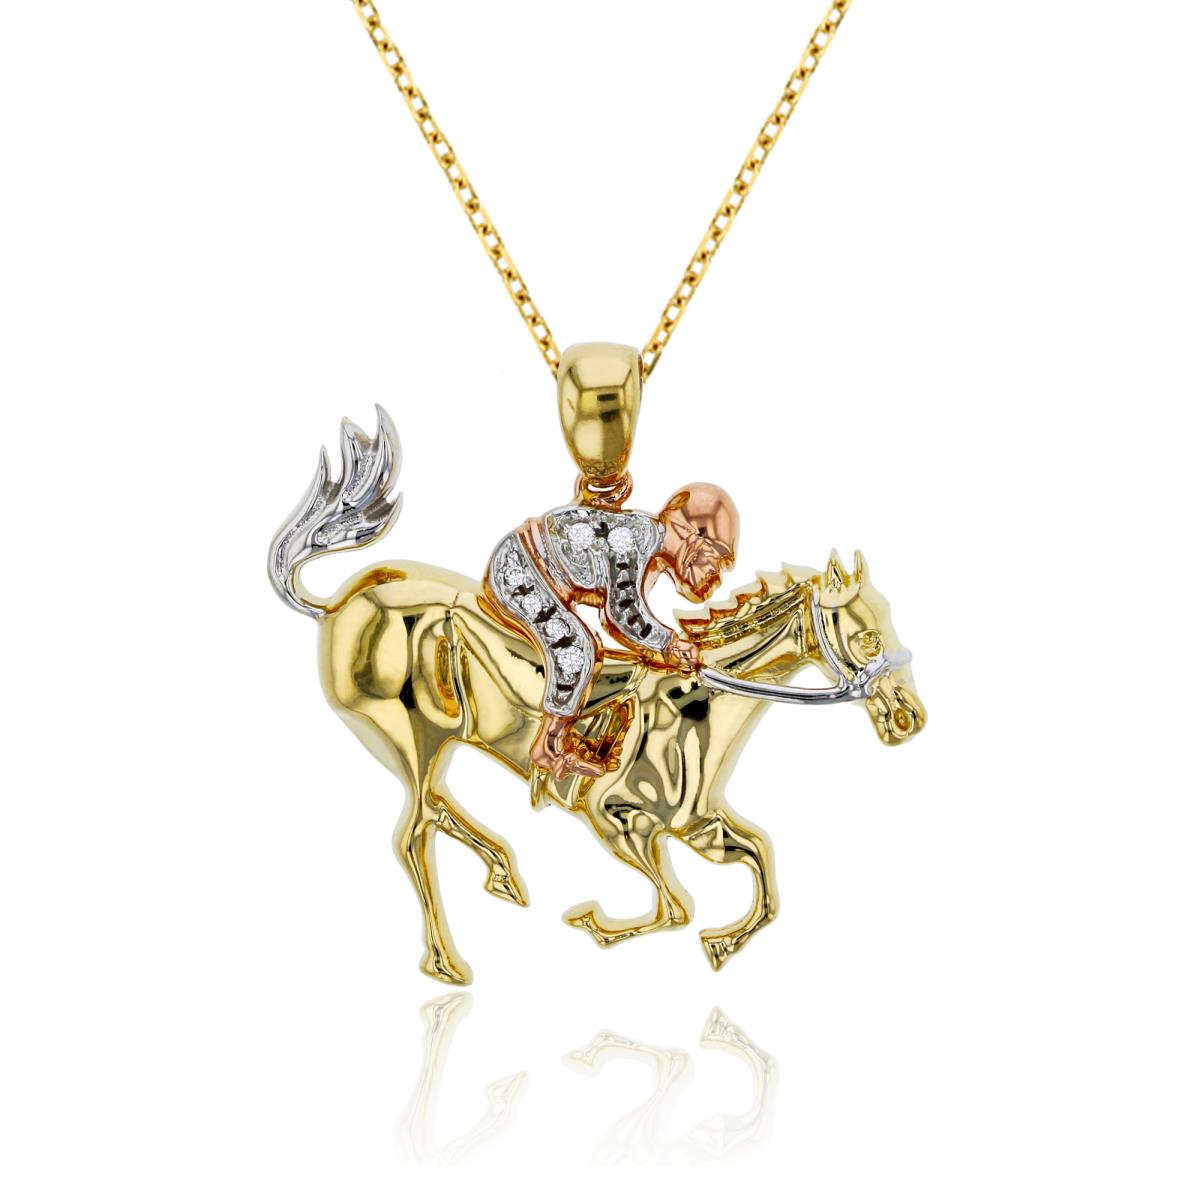 14K Gold Tricolor 28x28mm Horse & Rider 20" Cable Chain Necklace